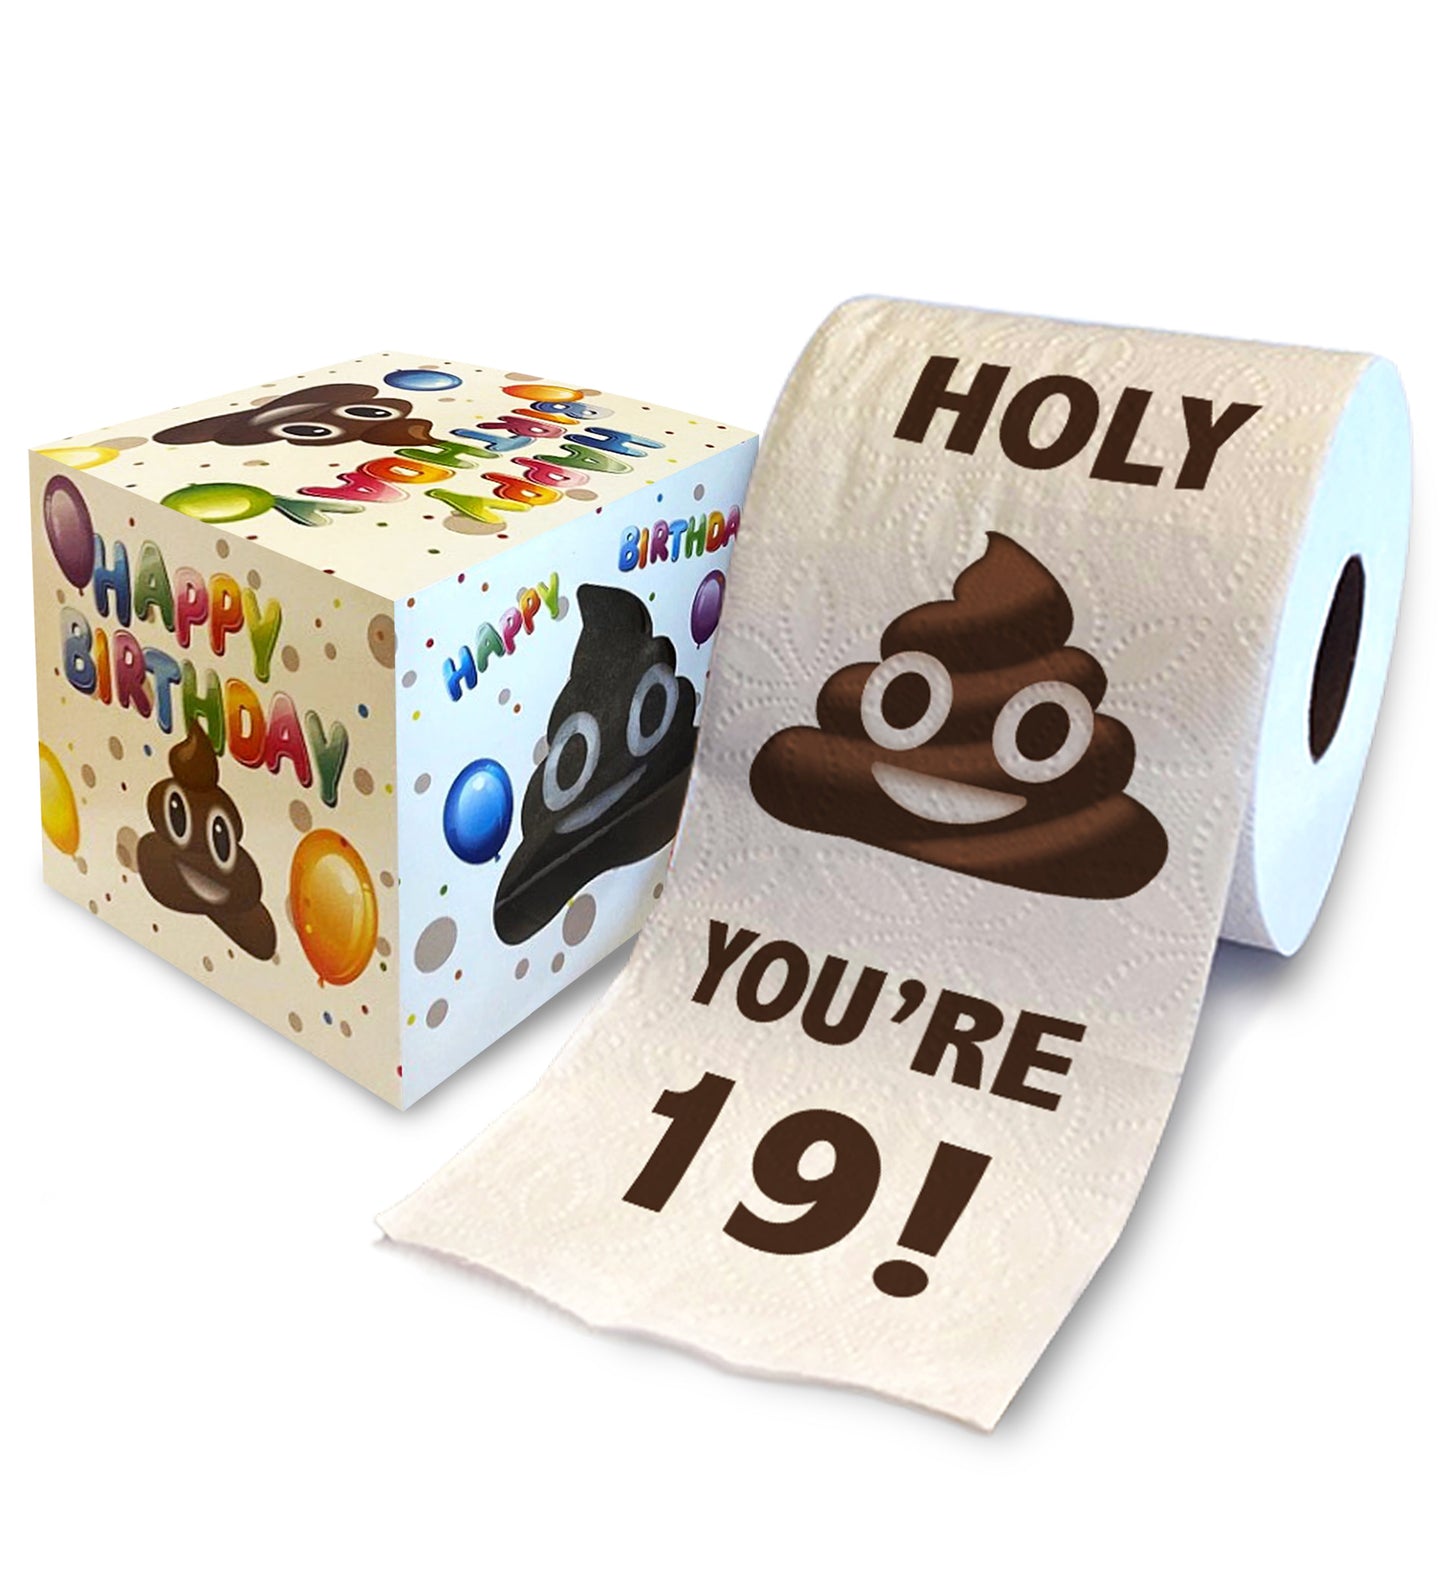 Printed TP Holy Poop You're 19 Funny Toilet Paper Roll Birthday Party Gag Gift